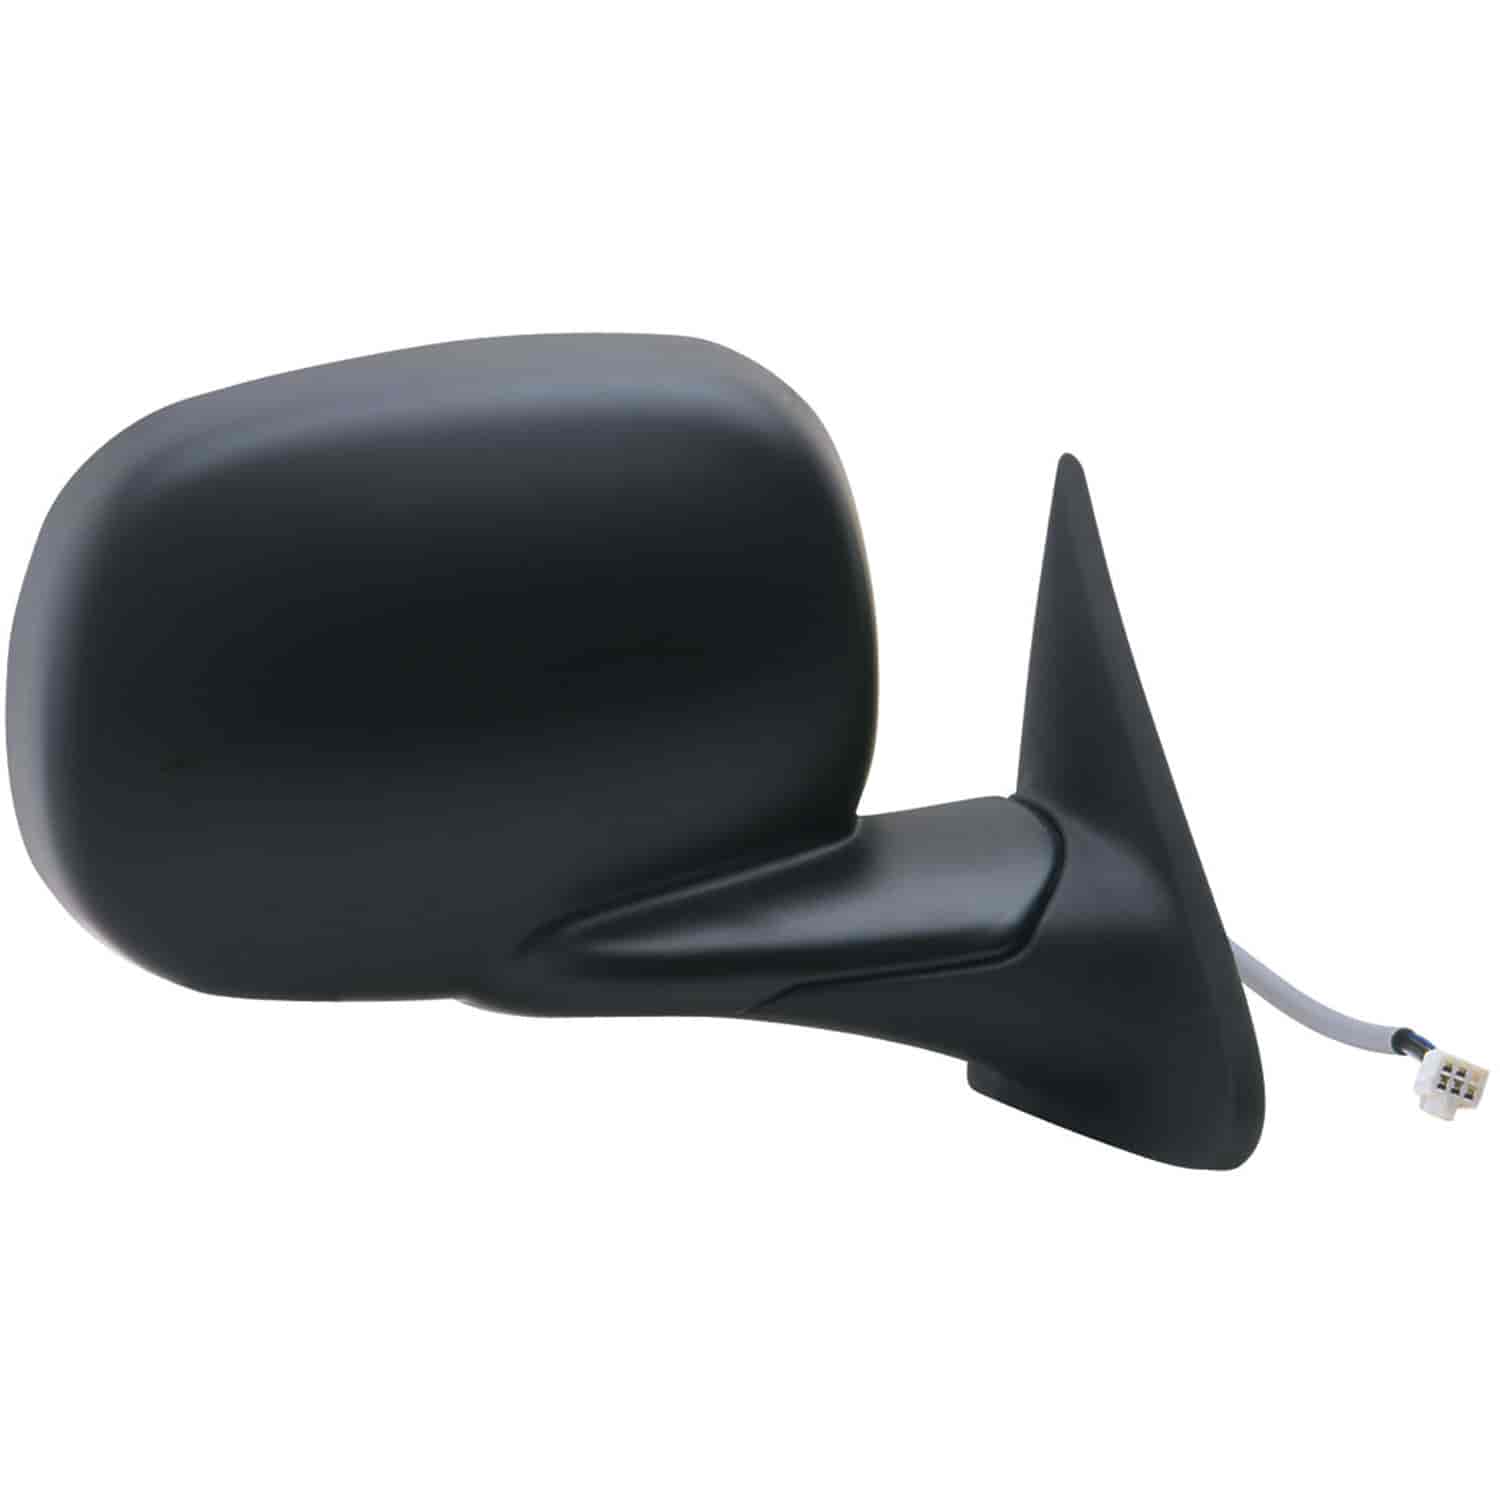 OEM Style Replacement mirror for 98-01 Dodge Pick-Up passenger side mirror tested to fit and functio